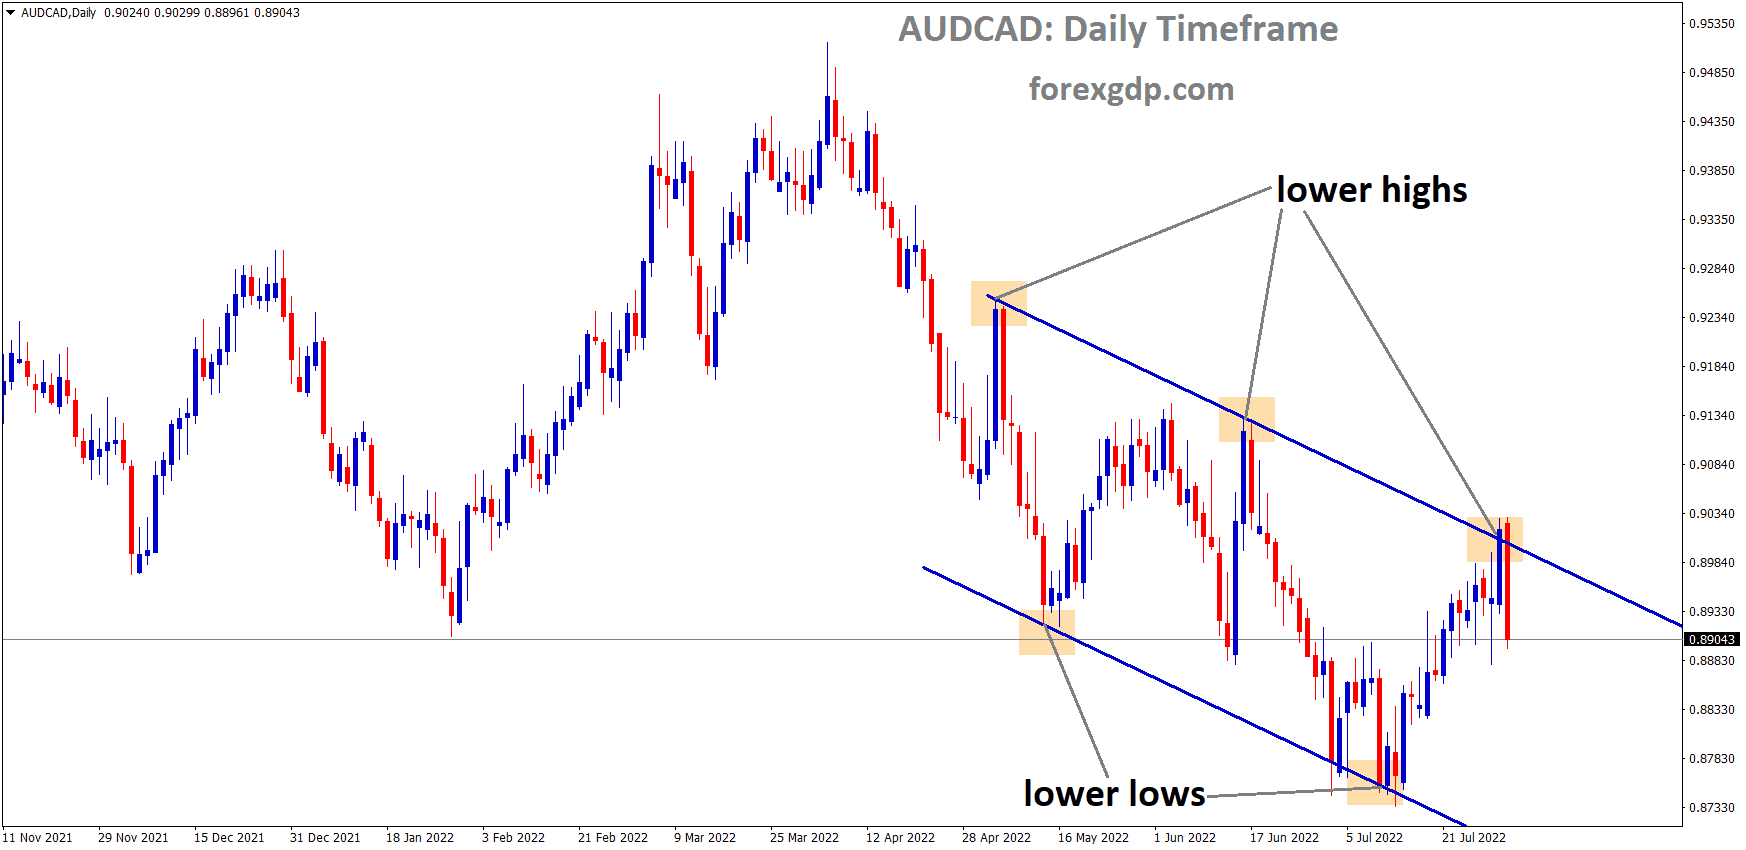 AUDCAD is moving in the Descending channel and the Market has fallen from the Lower high area of the channel